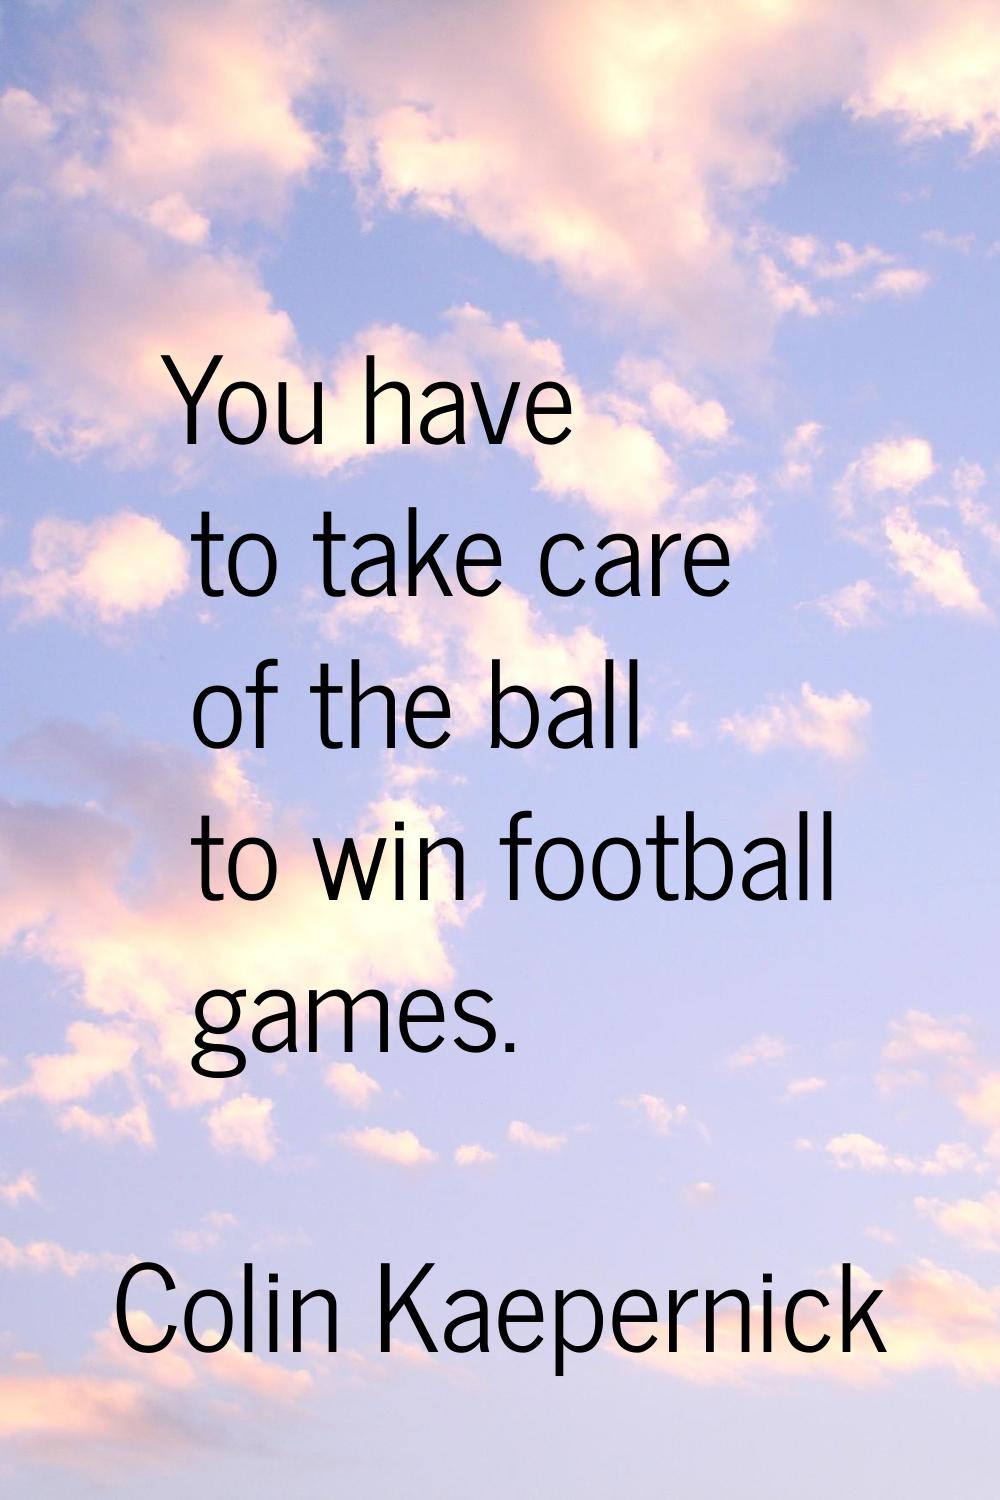 You have to take care of the ball to win football games.